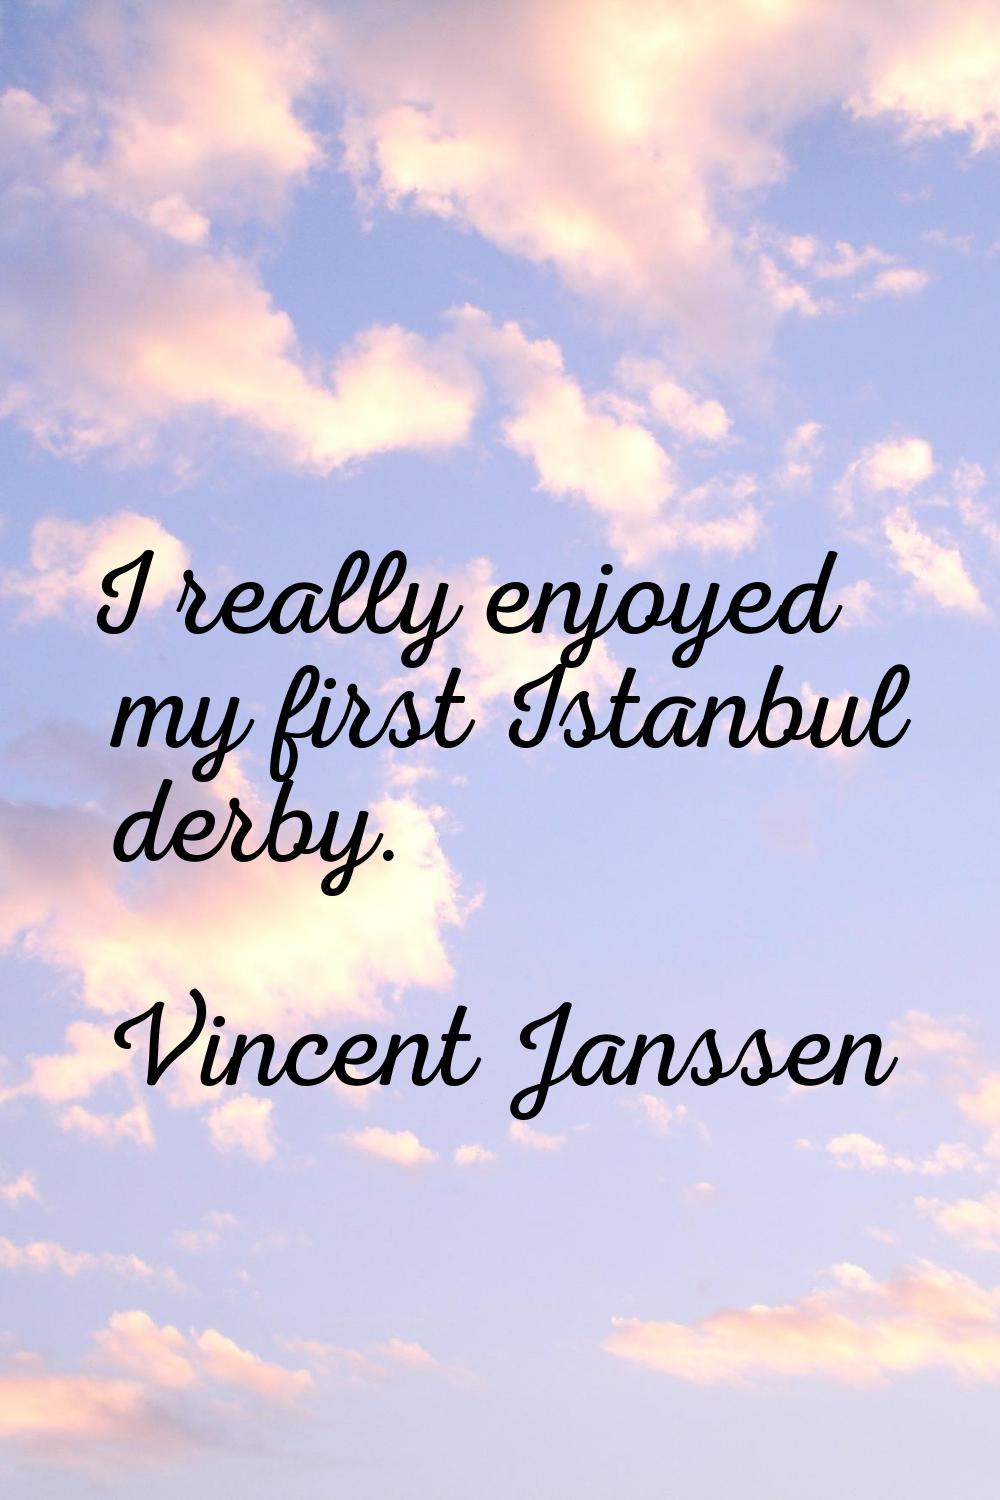 I really enjoyed my first Istanbul derby.